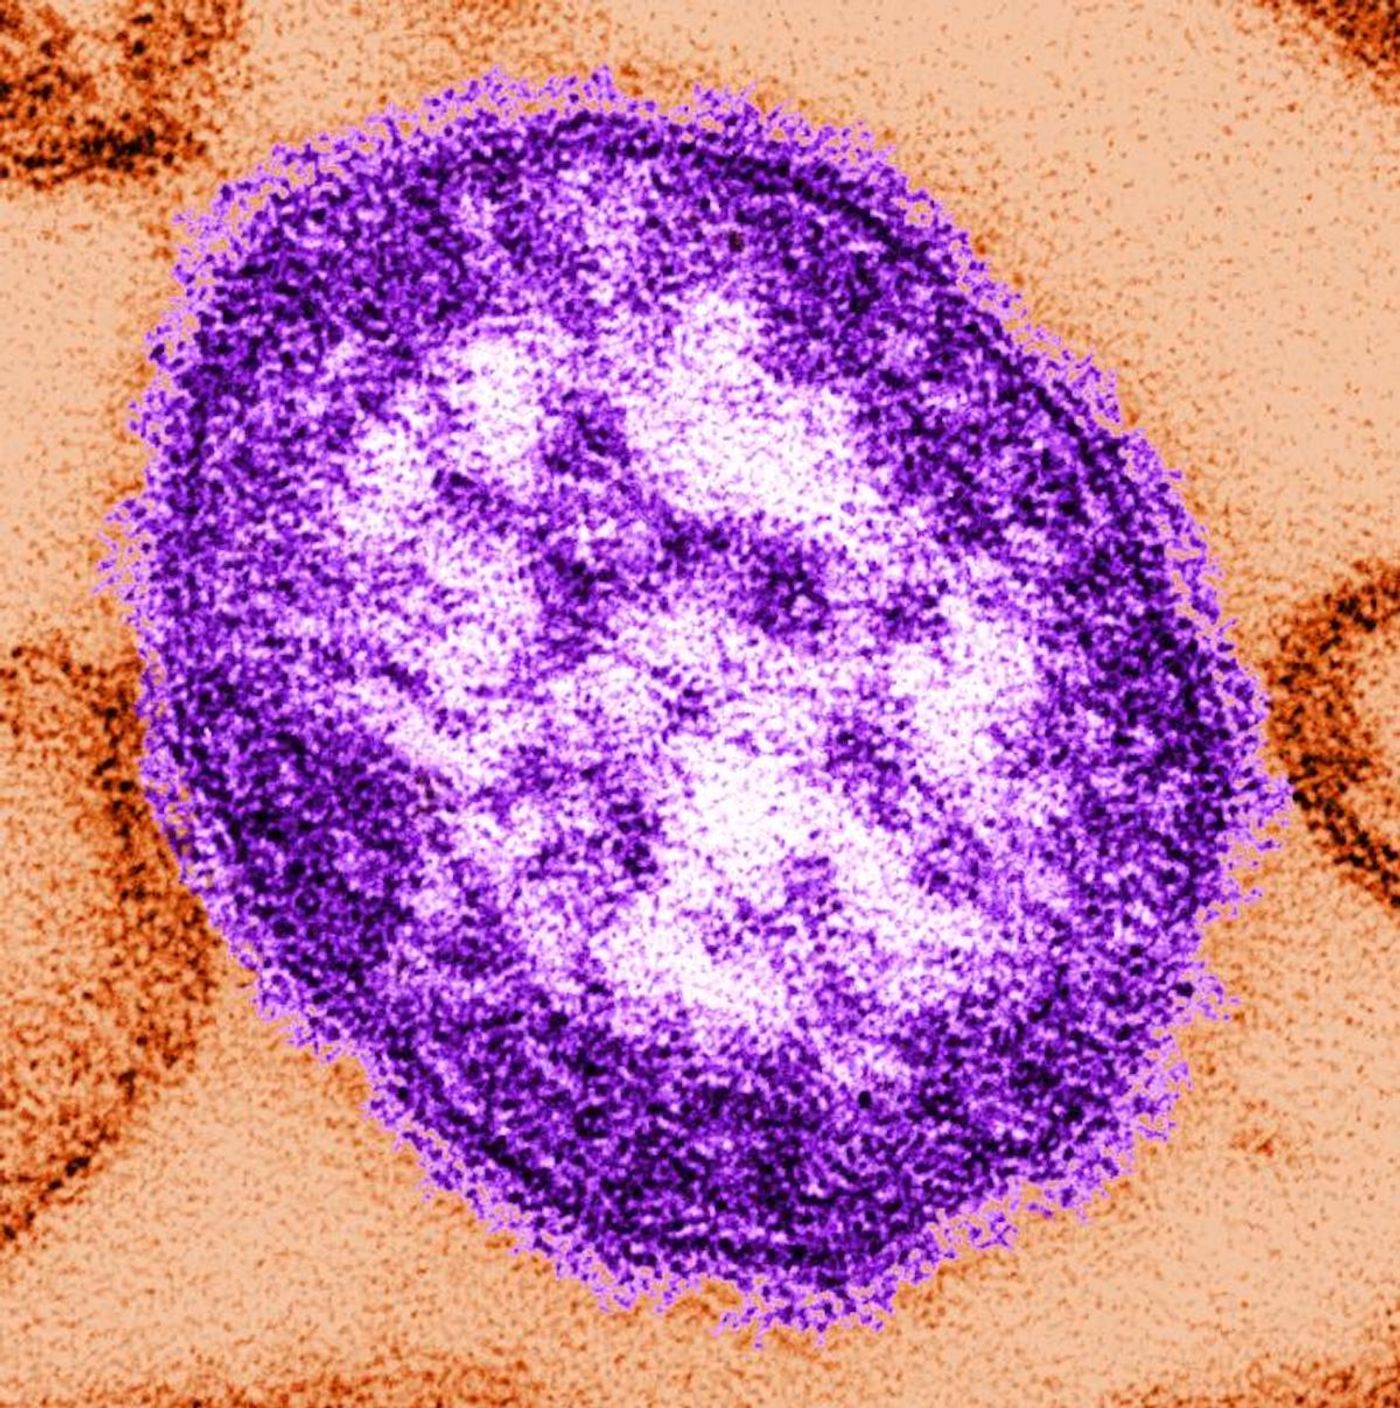 A digitally-colorized TEM image of a single measles virus particle, with the viral nucleocapsid situated underneath the viral envelope, surrounded by surface projections. / Credit: CDC/ Cynthia S. Goldsmith; William Bellini, Ph.D.